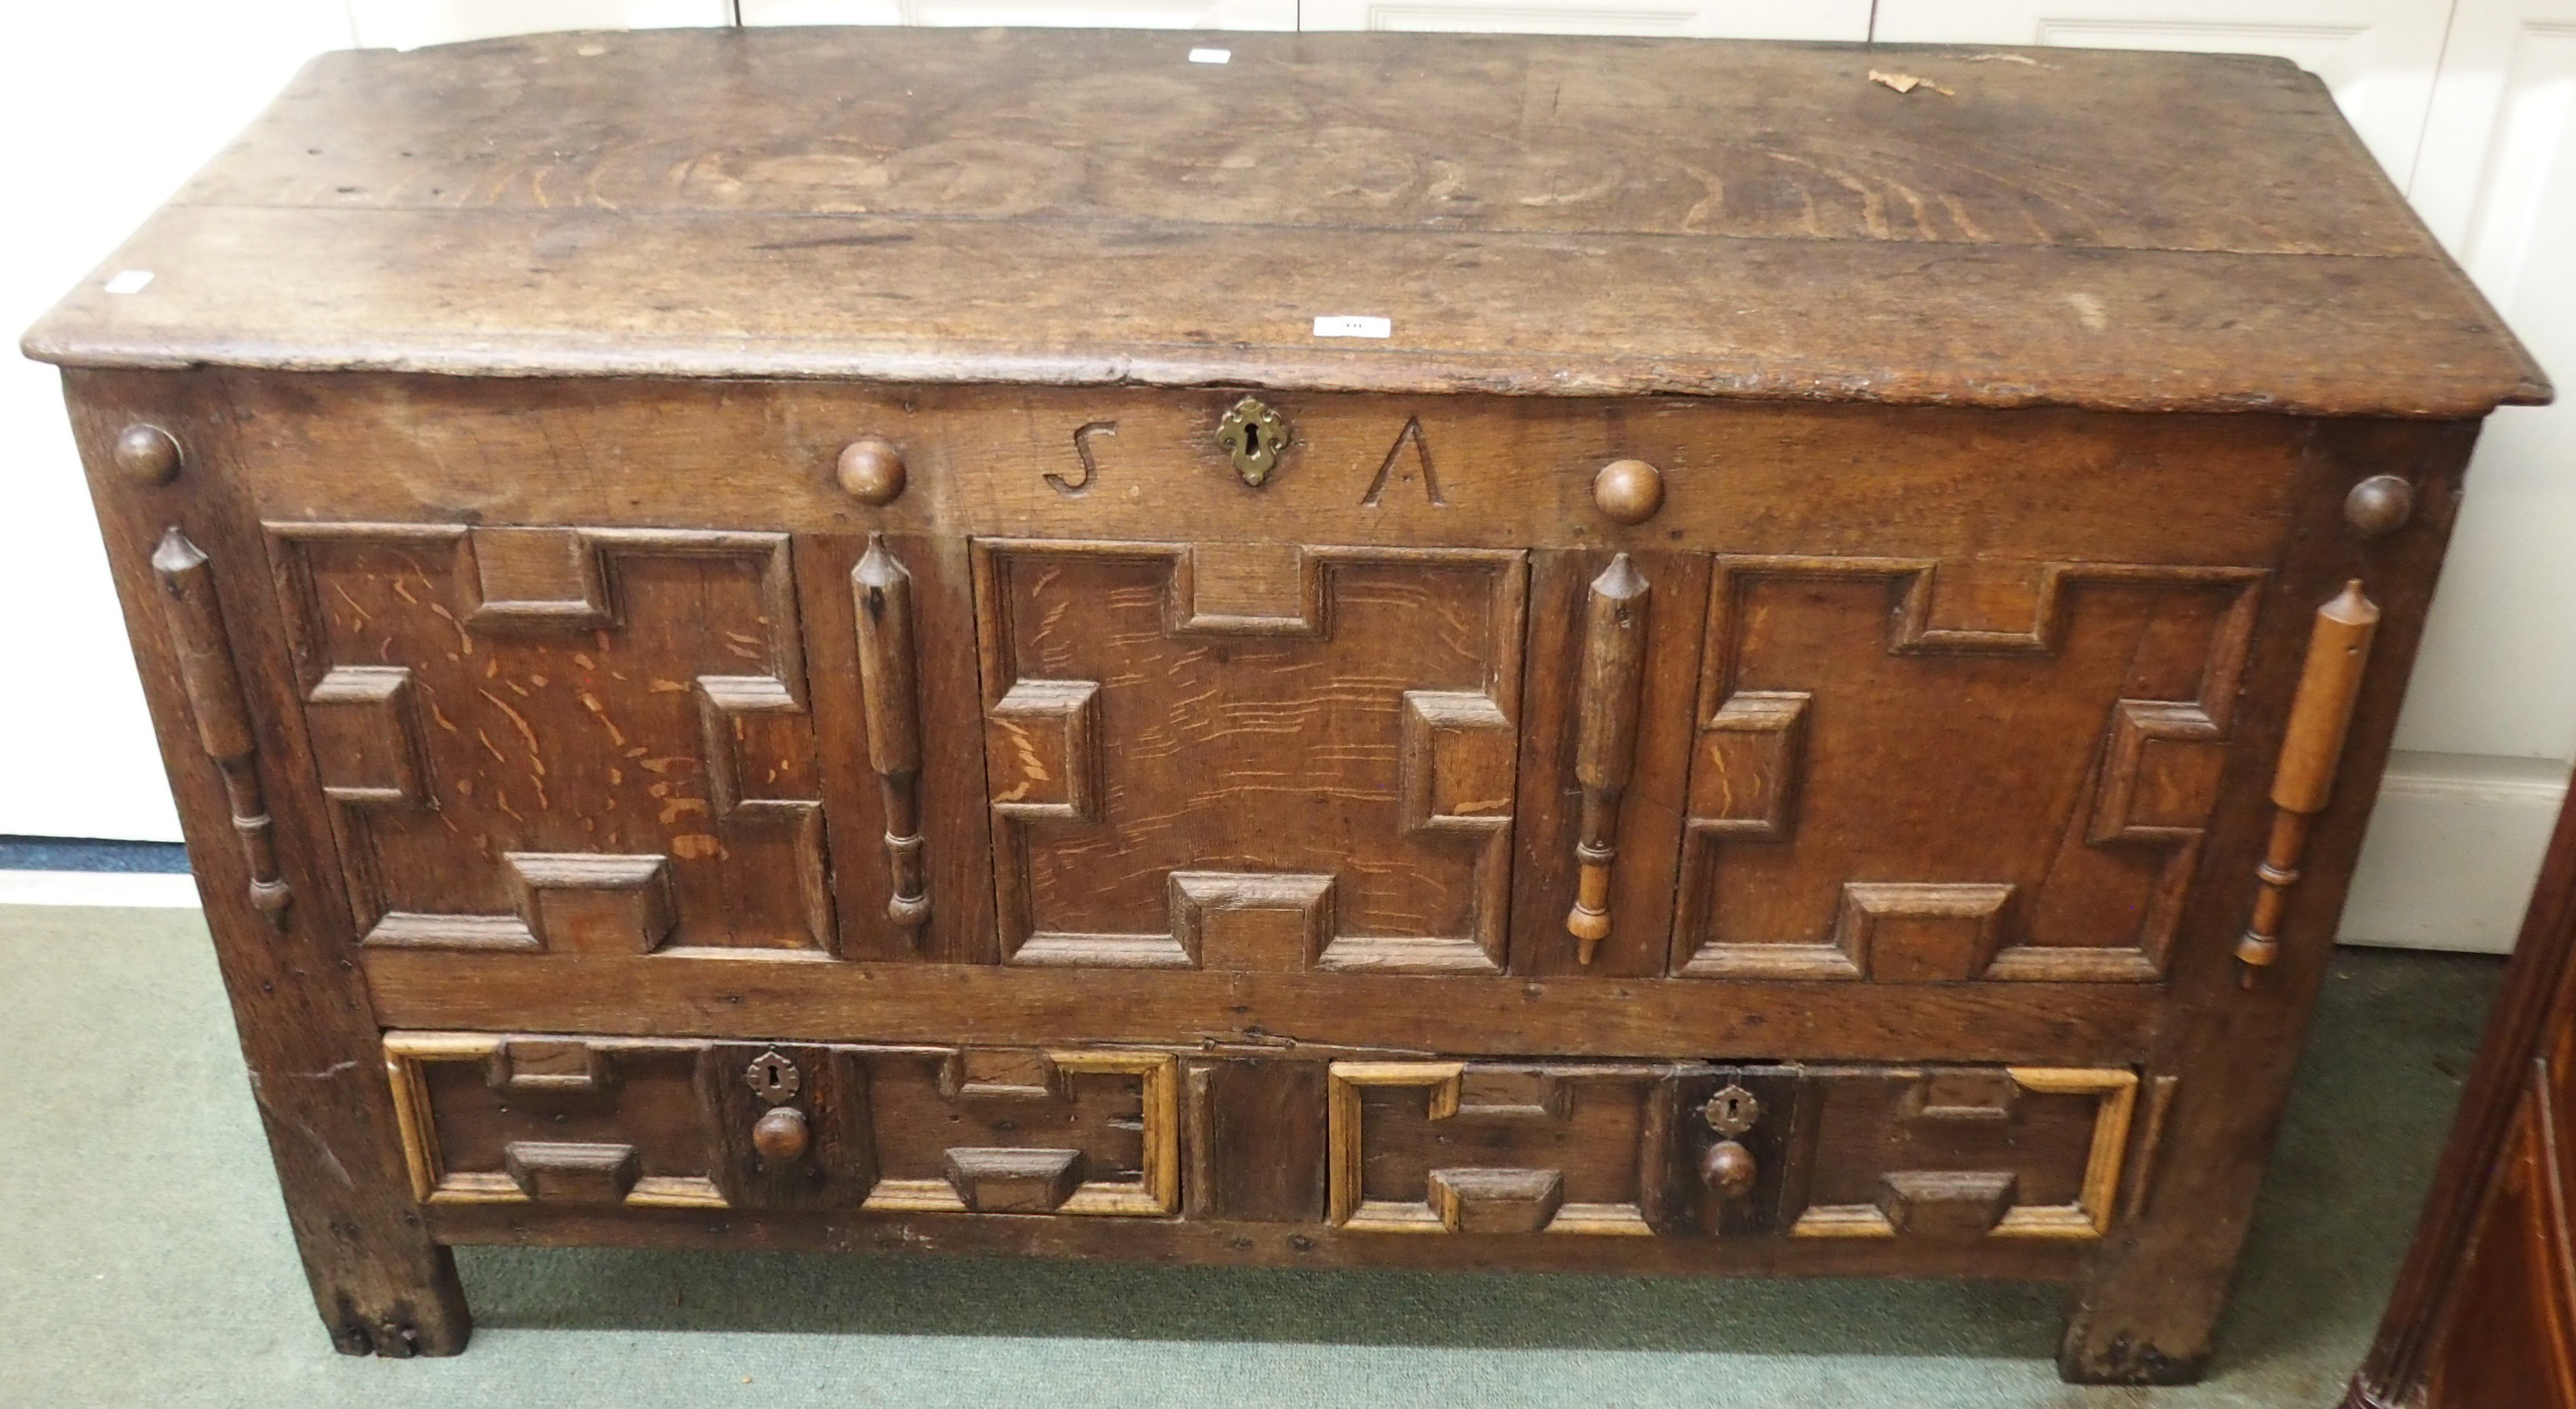 An oak coffer with panel front with two lower drawers and S A carved initials, 73cm high x 132cm